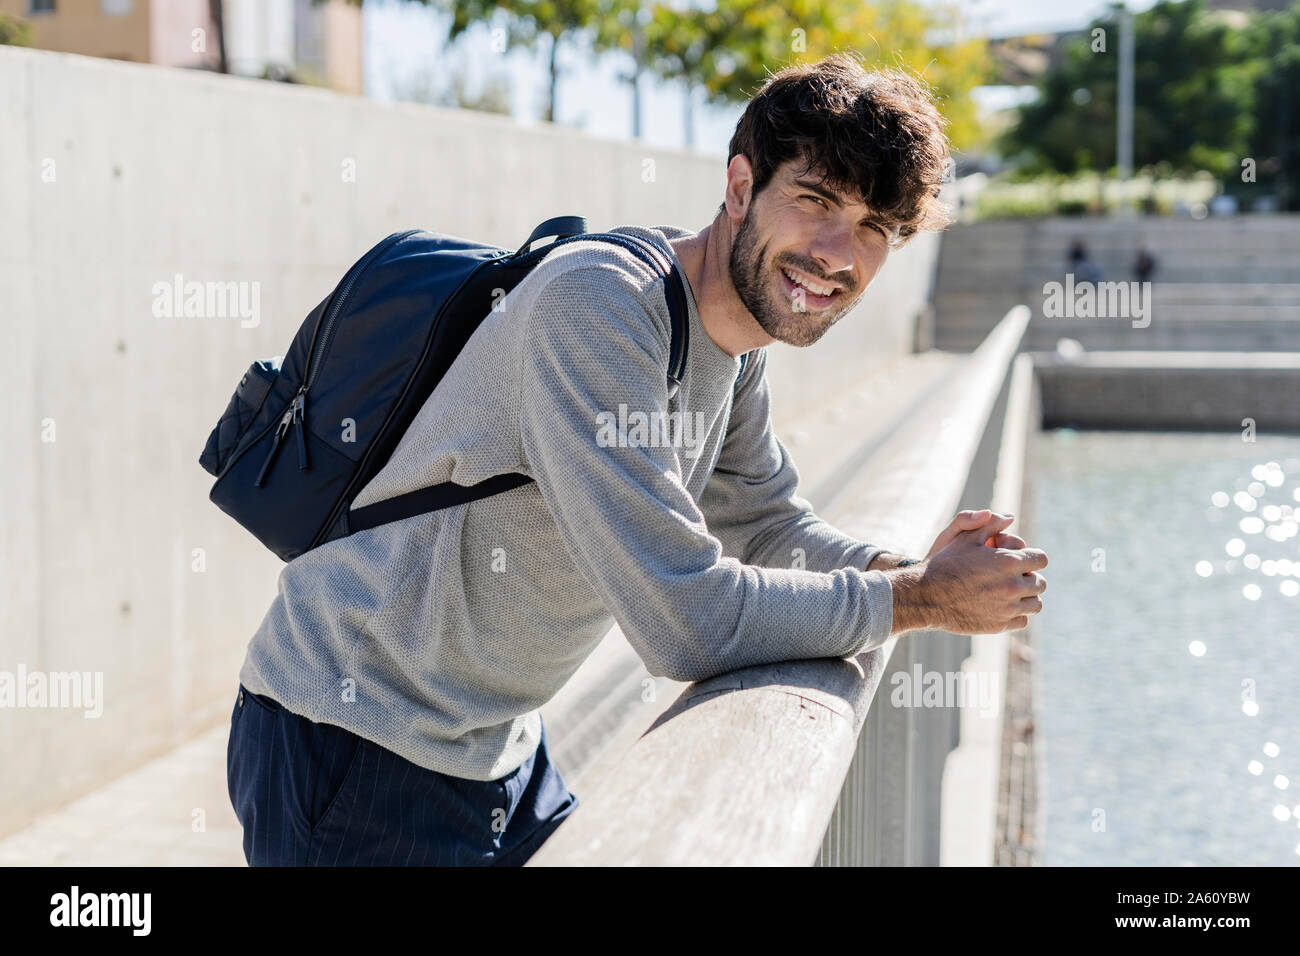 Portrait of smiling man with backpack having a break in the city Stock Photo